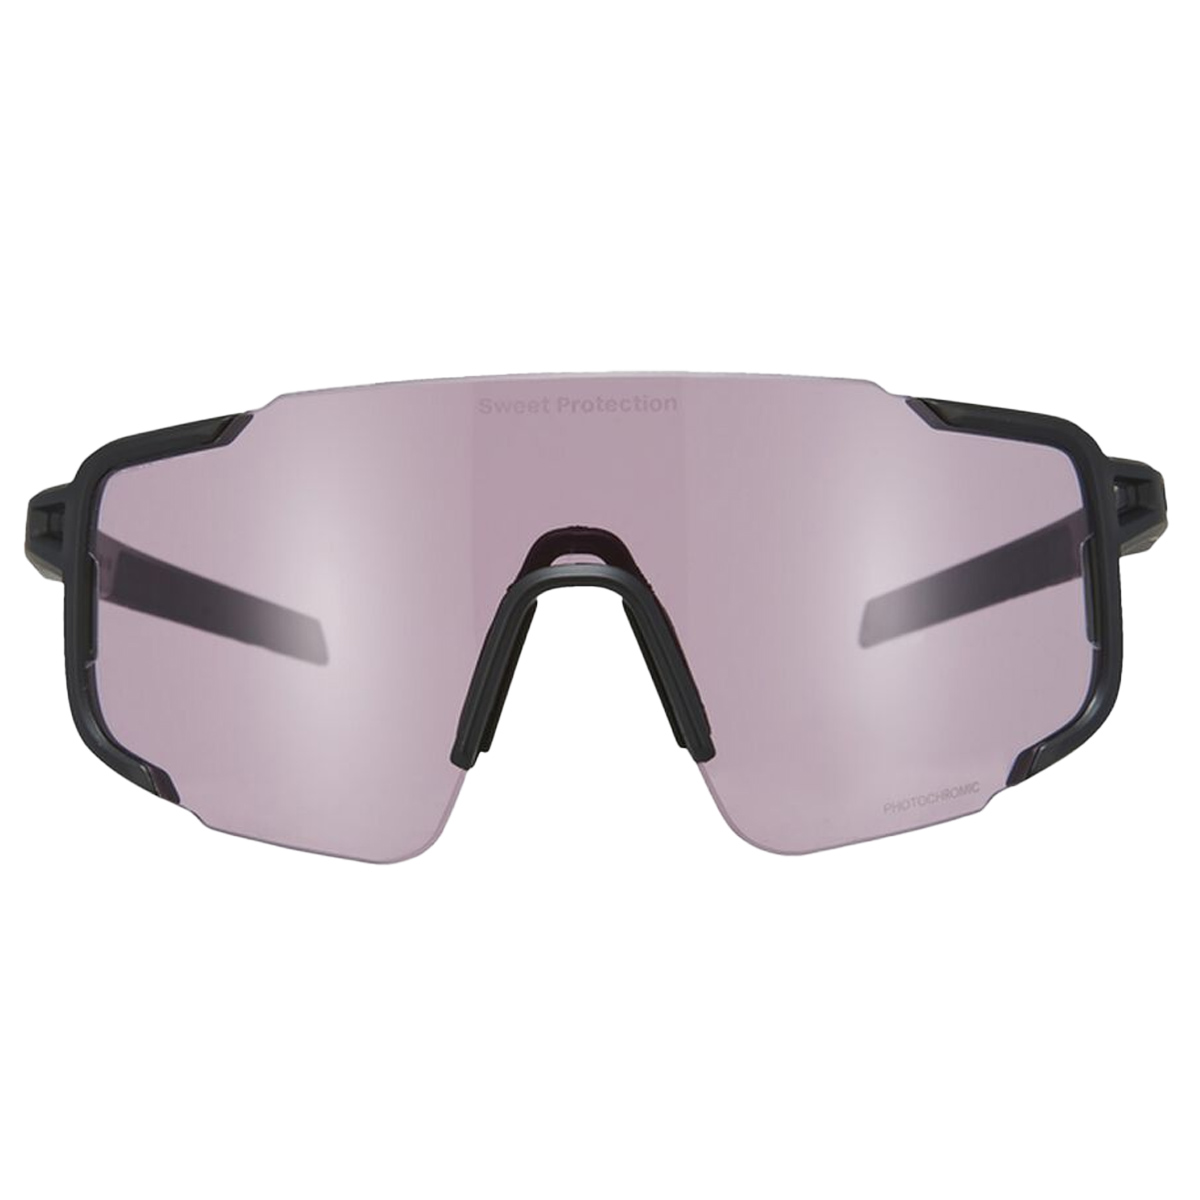 Sweet Protection Ronin Max RIG Photochromic Replacement Lens